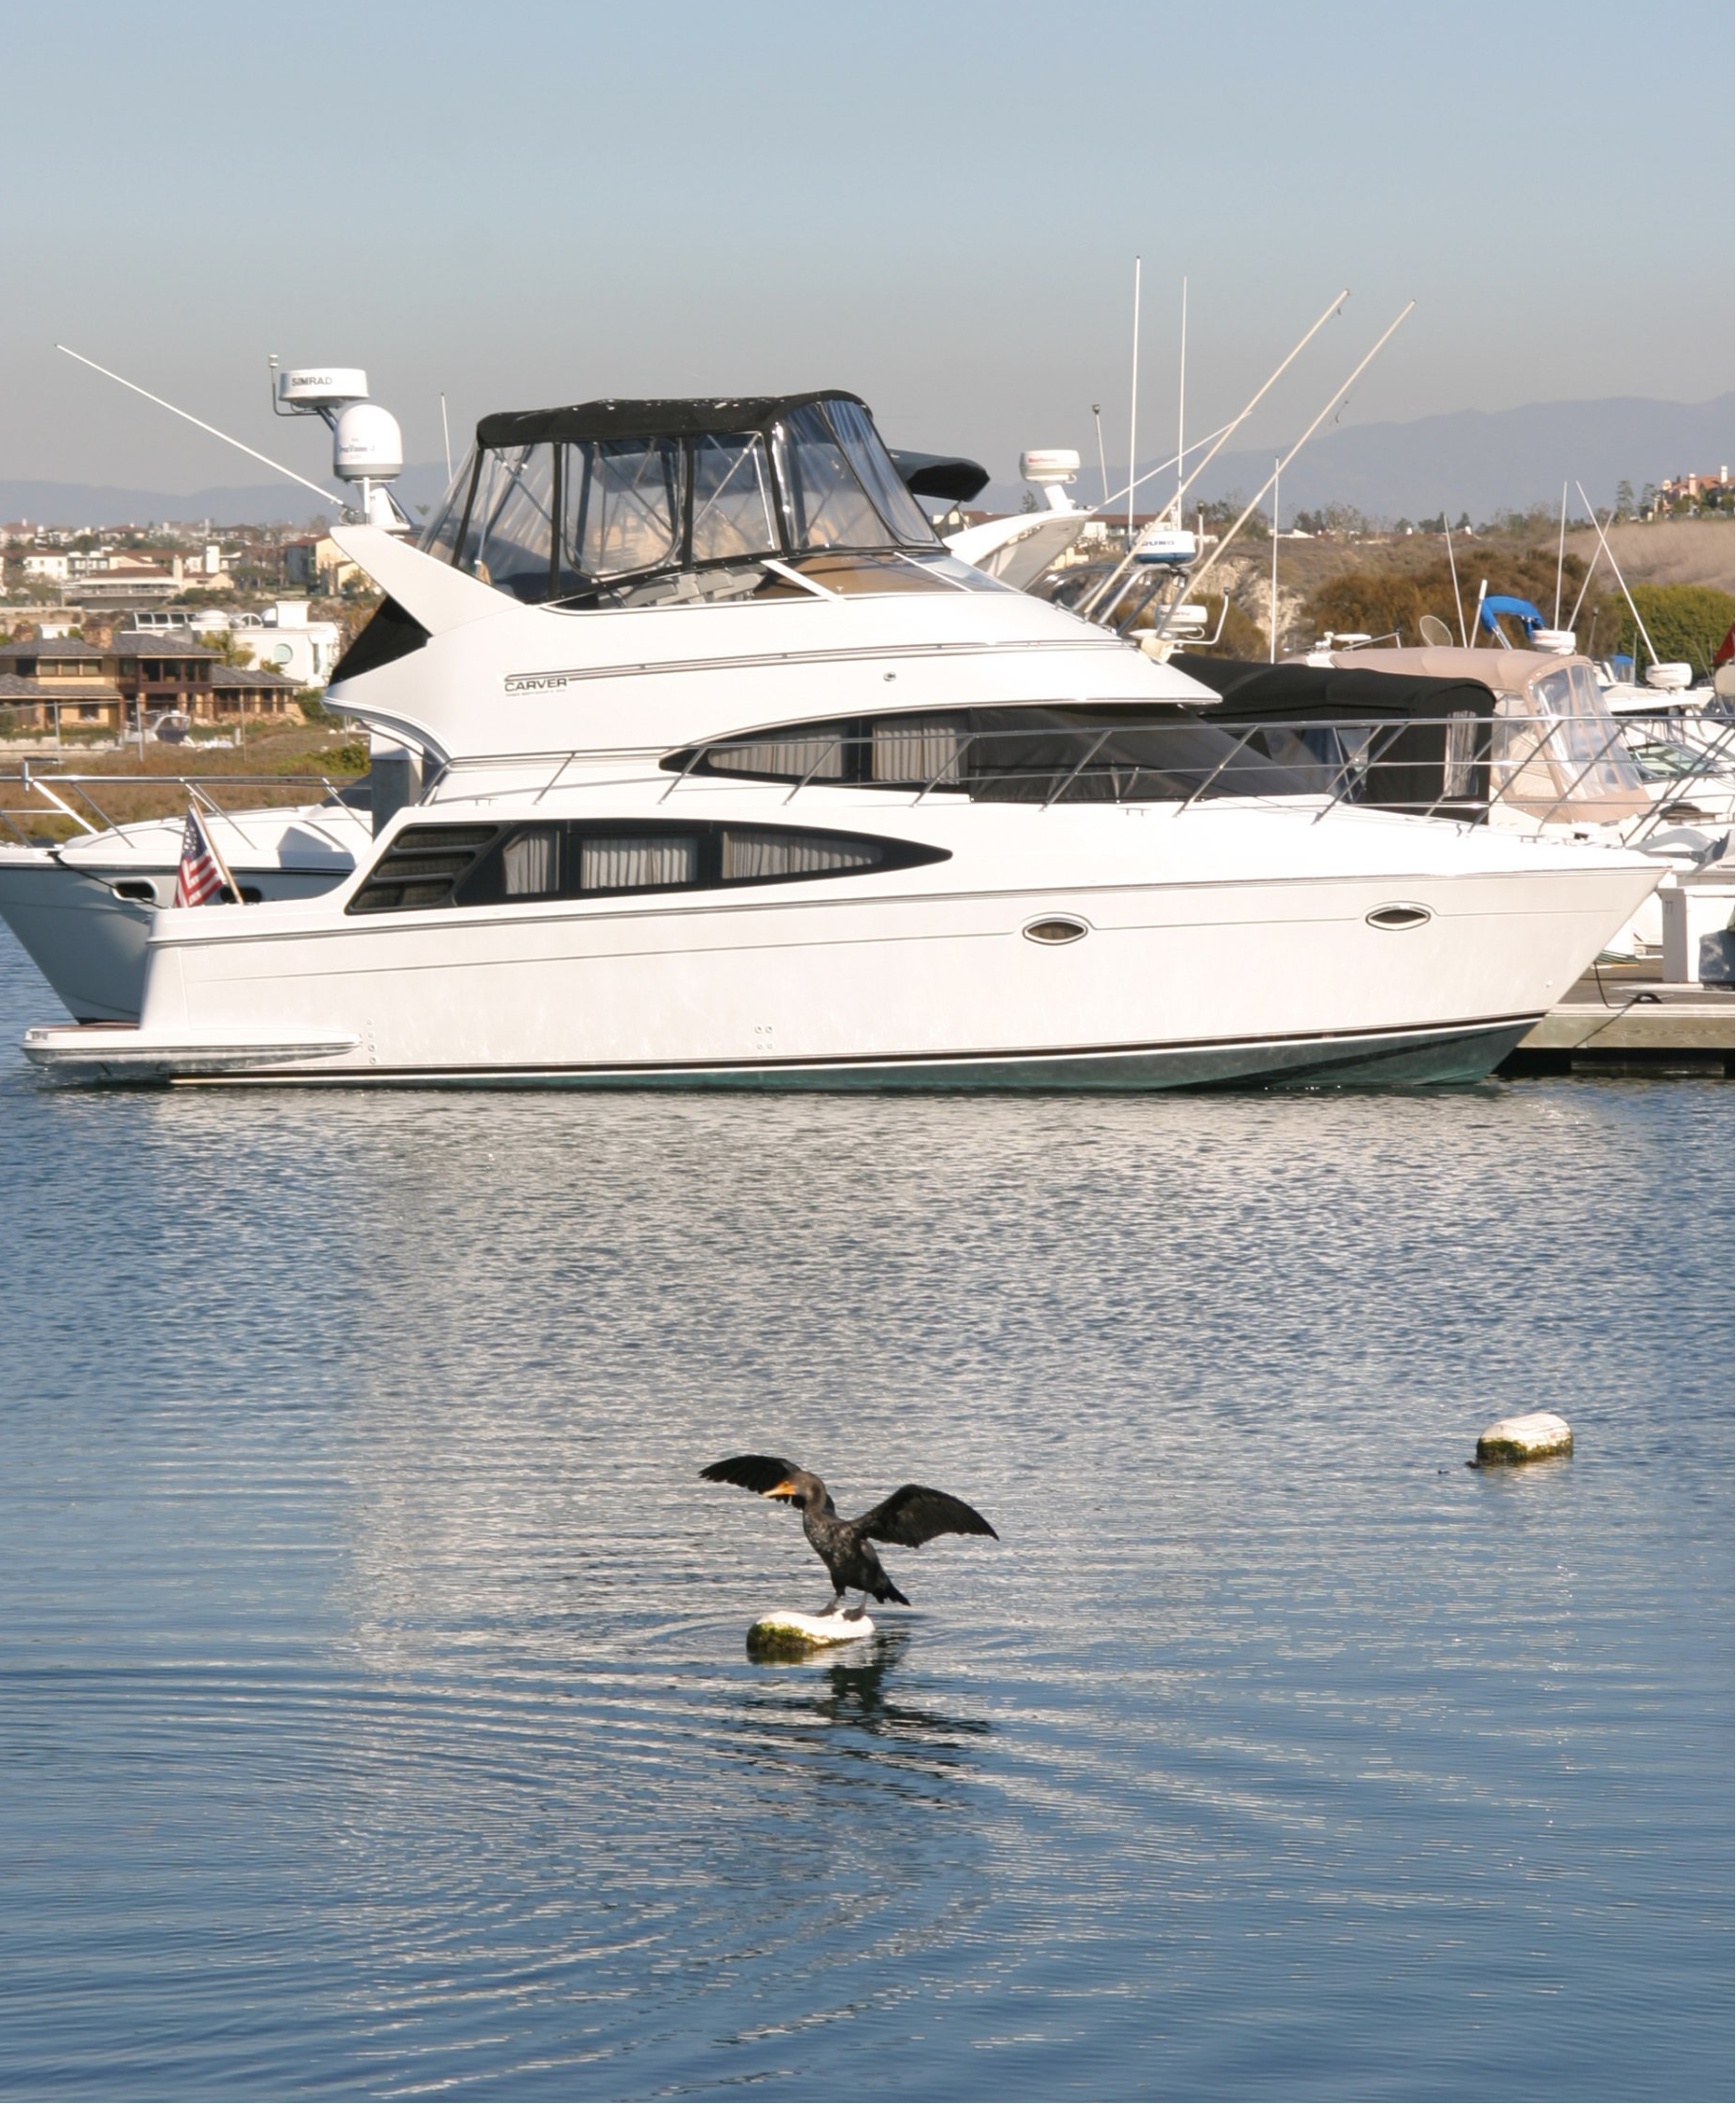 Yacht slipped in Bayside Village Marina with shore bird in foreground